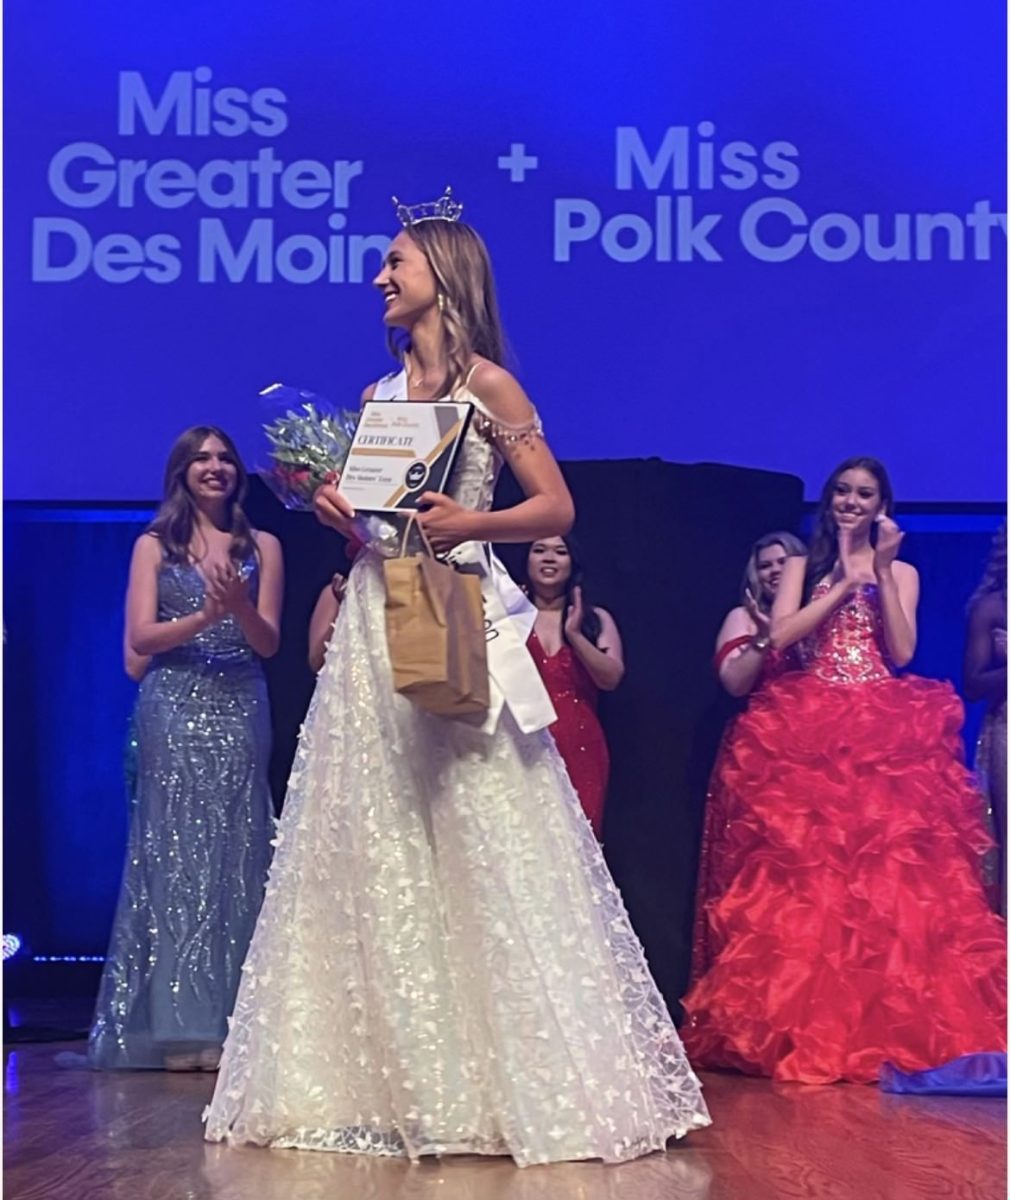 Pleasant Valley student Fiona Treiber wins the title of Ms. Greater Des Moines teen. Photo credit to Estelle Treiber.
